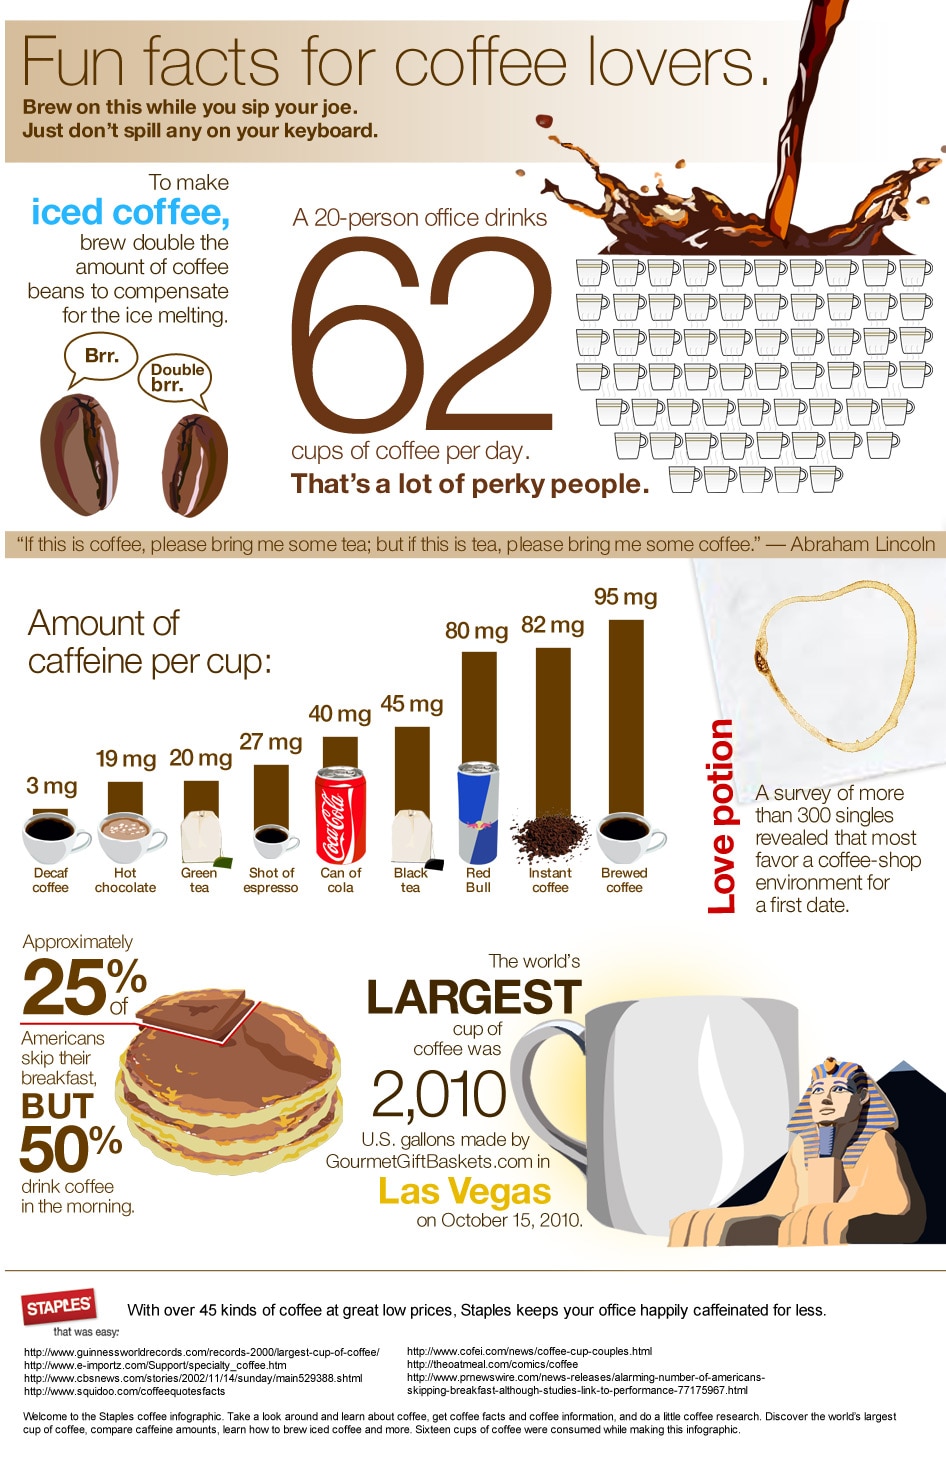 Our Cup of Coffee: 6 Caffeine Facts for Nurses - Nurseslabs